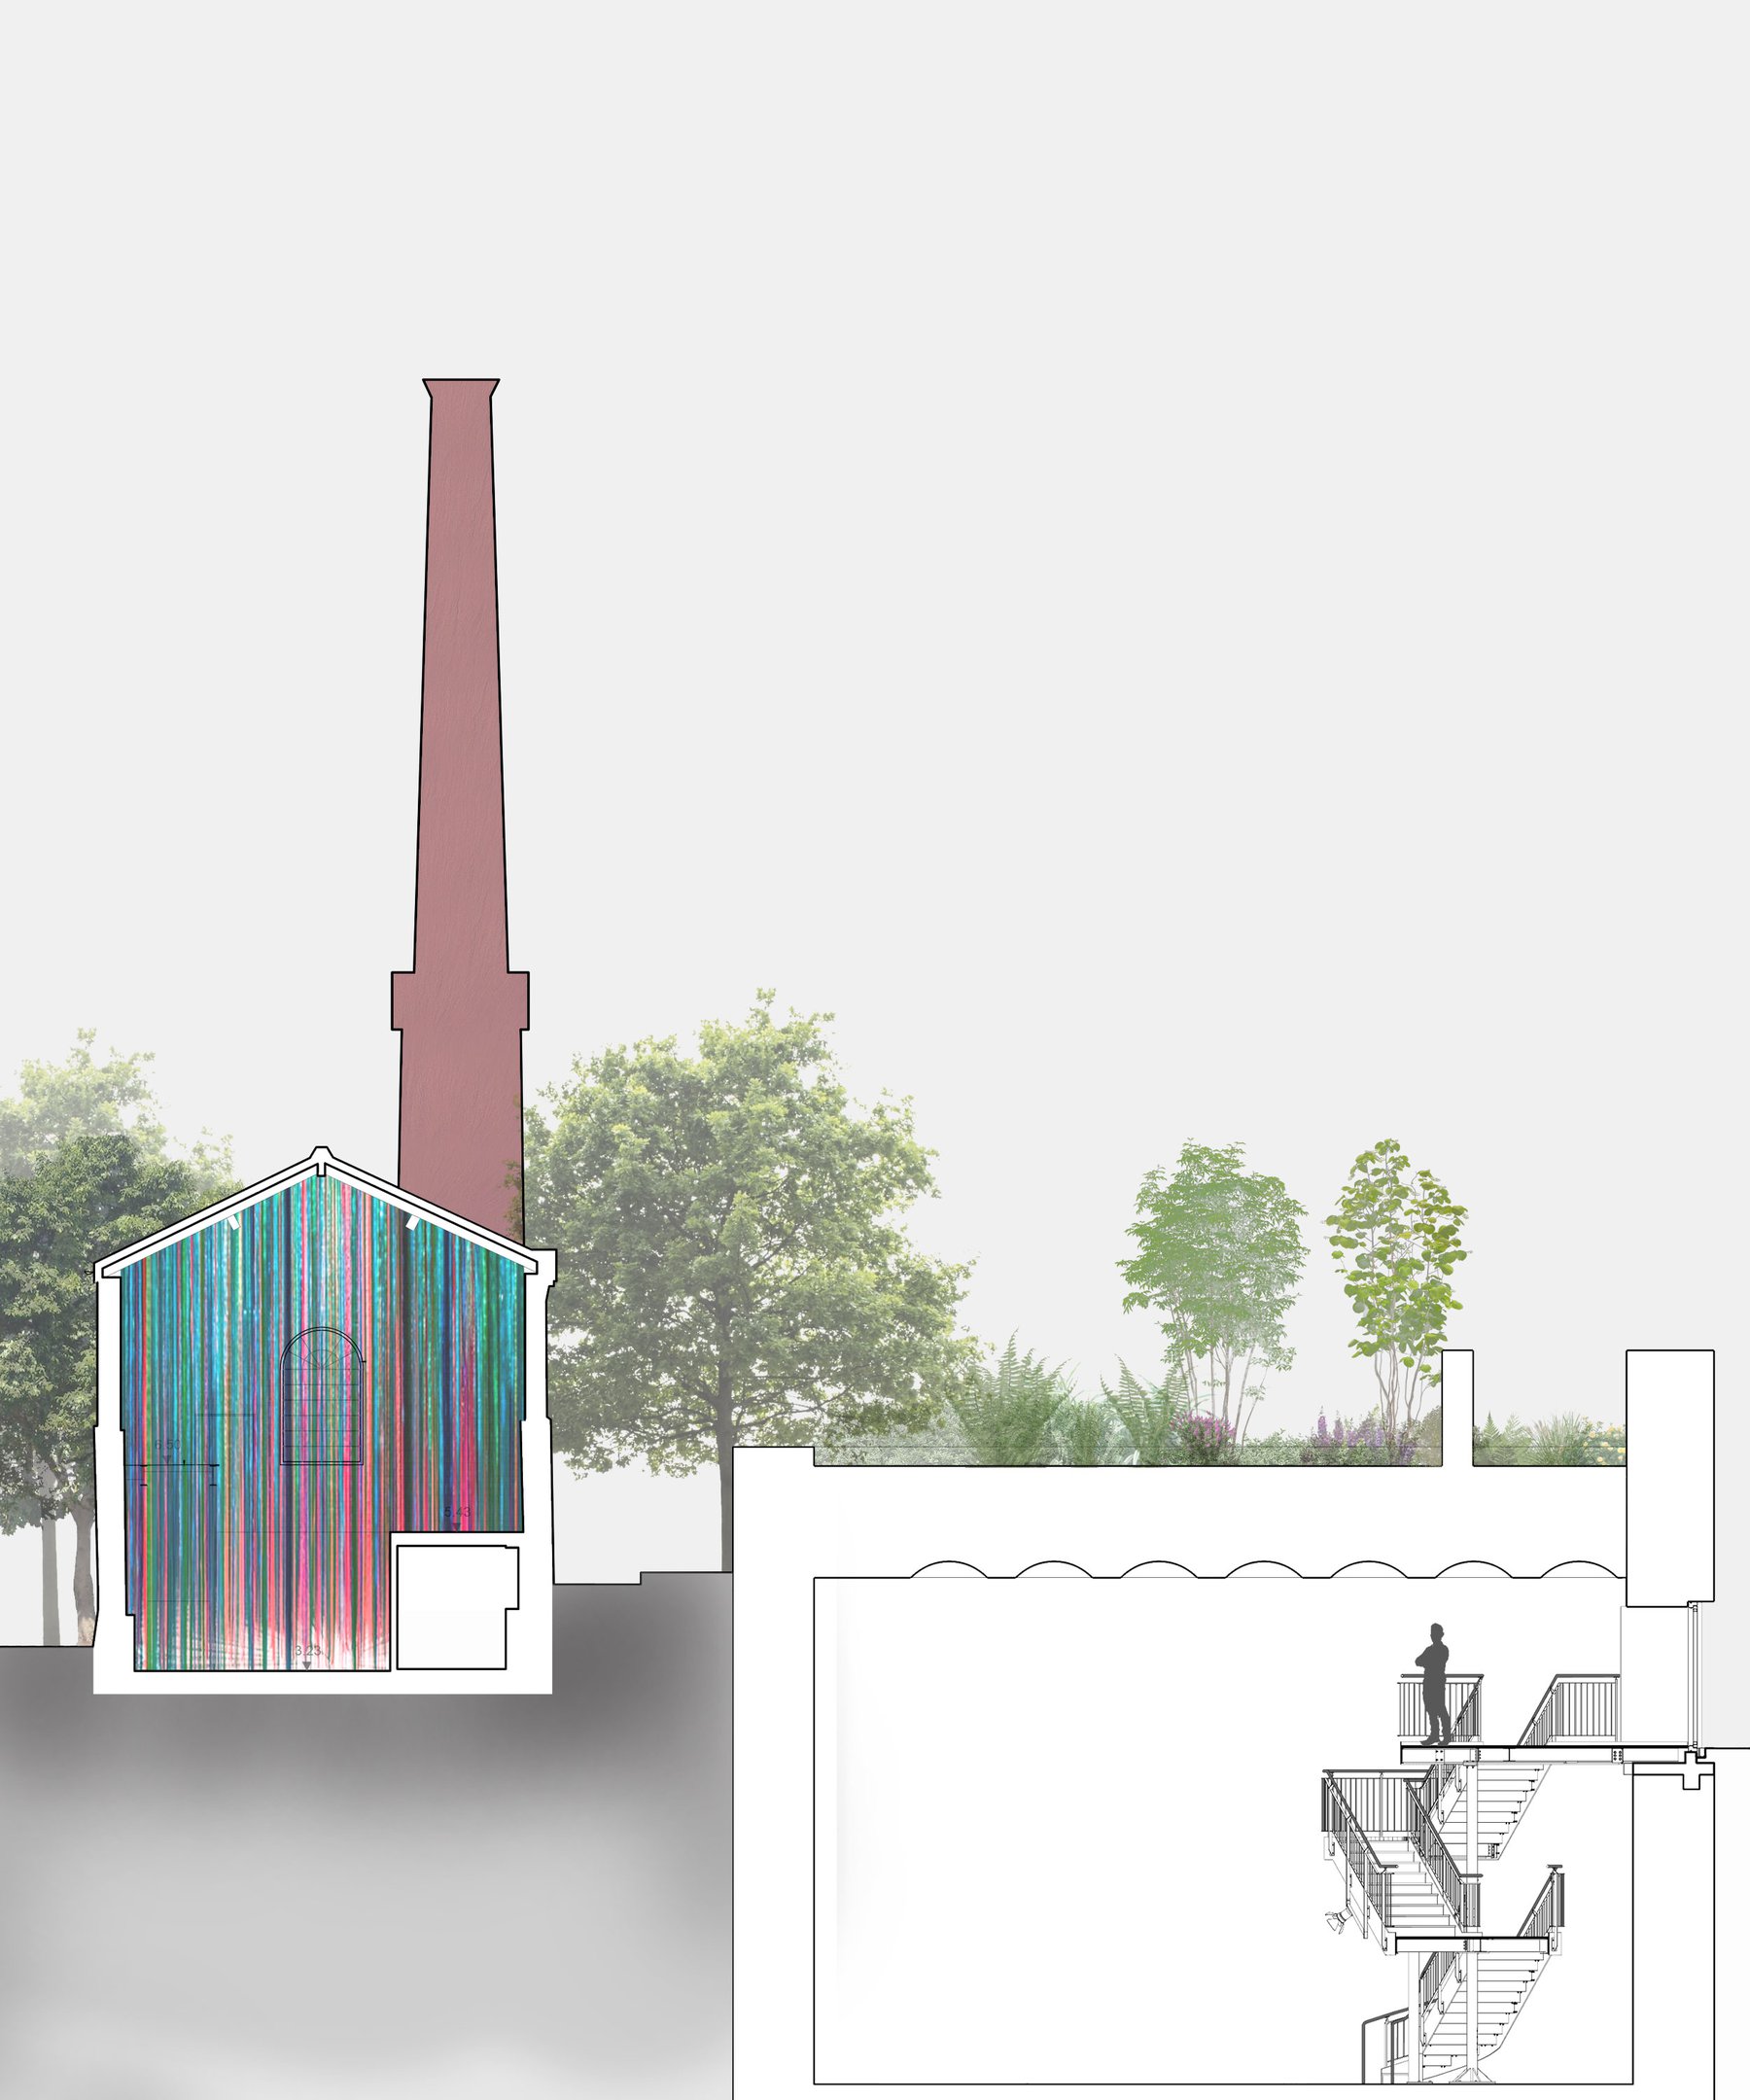 Image of Brunel Museum in section view with proposal inside engine house.